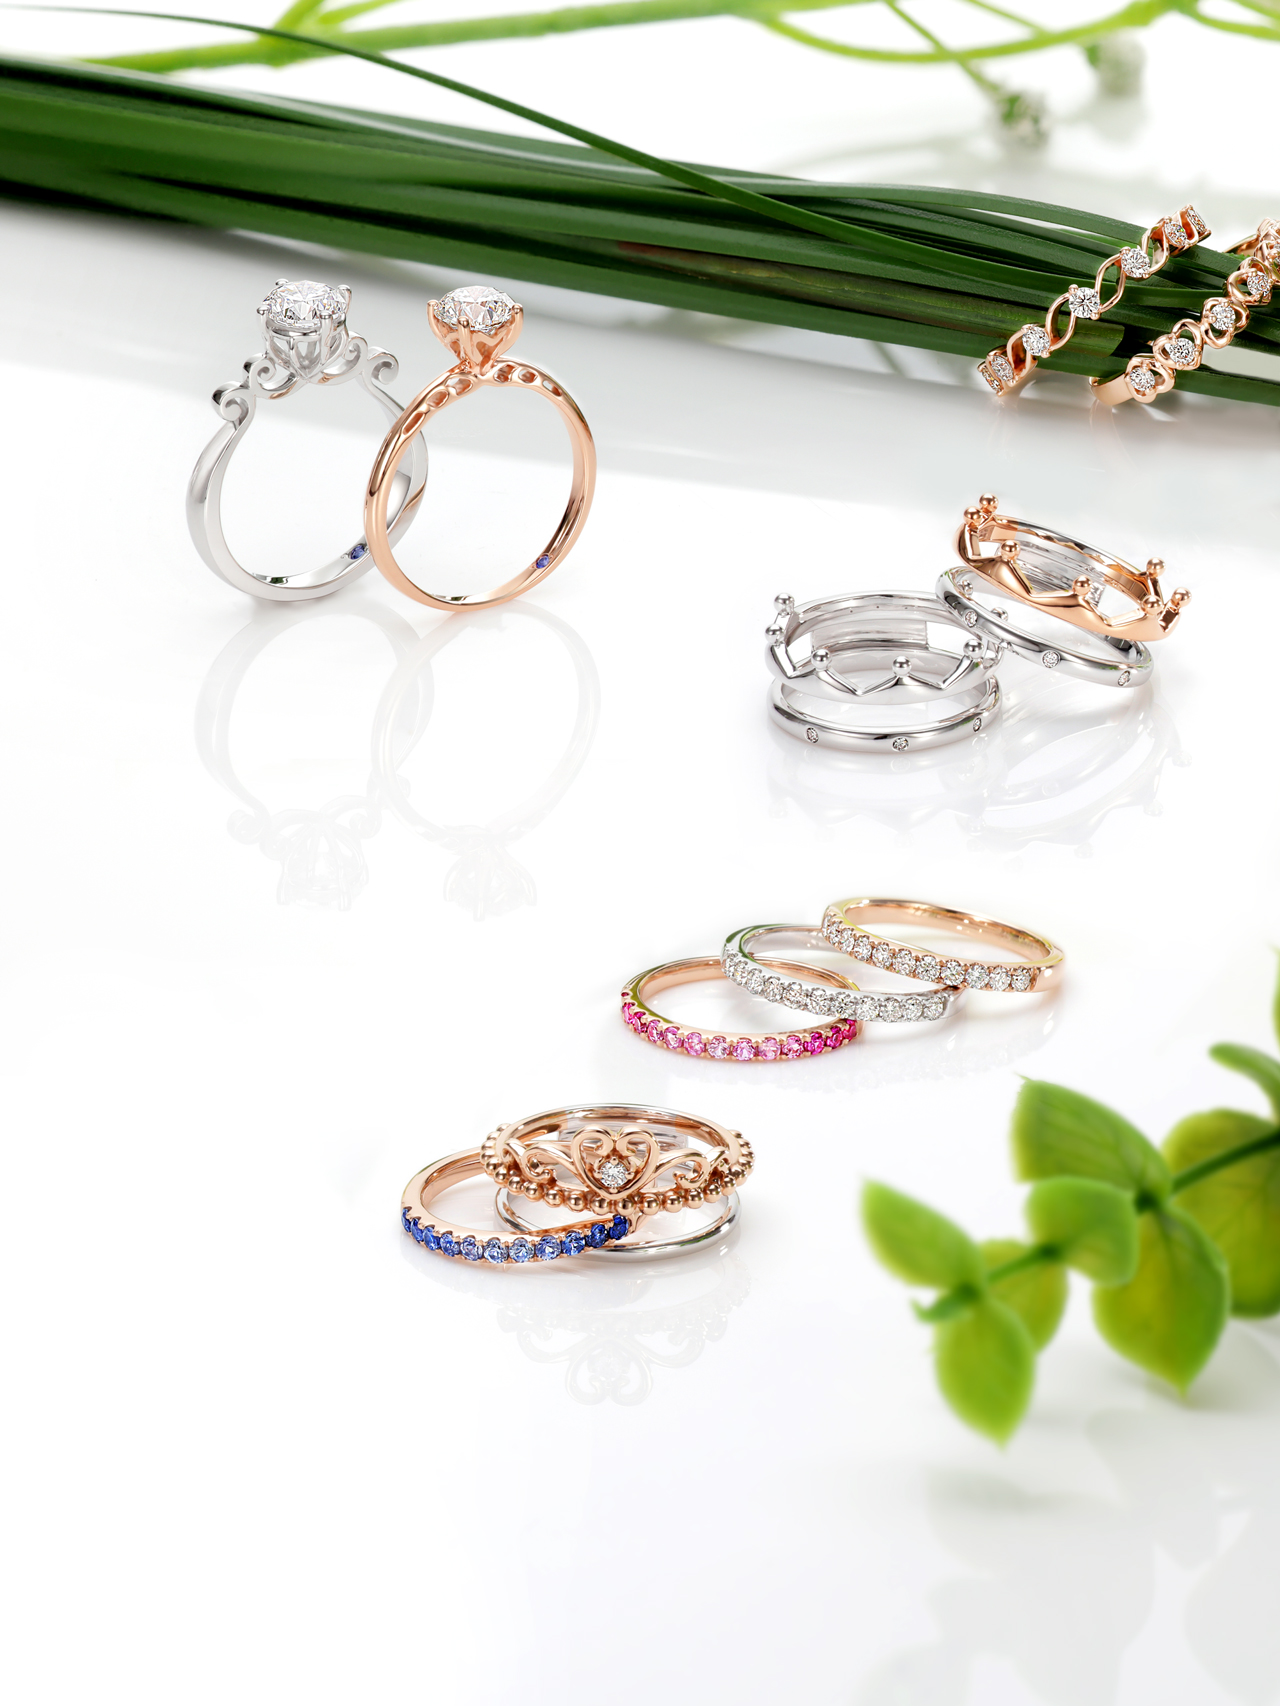 Wedding bands | Leading bridal jeweller in Singapore